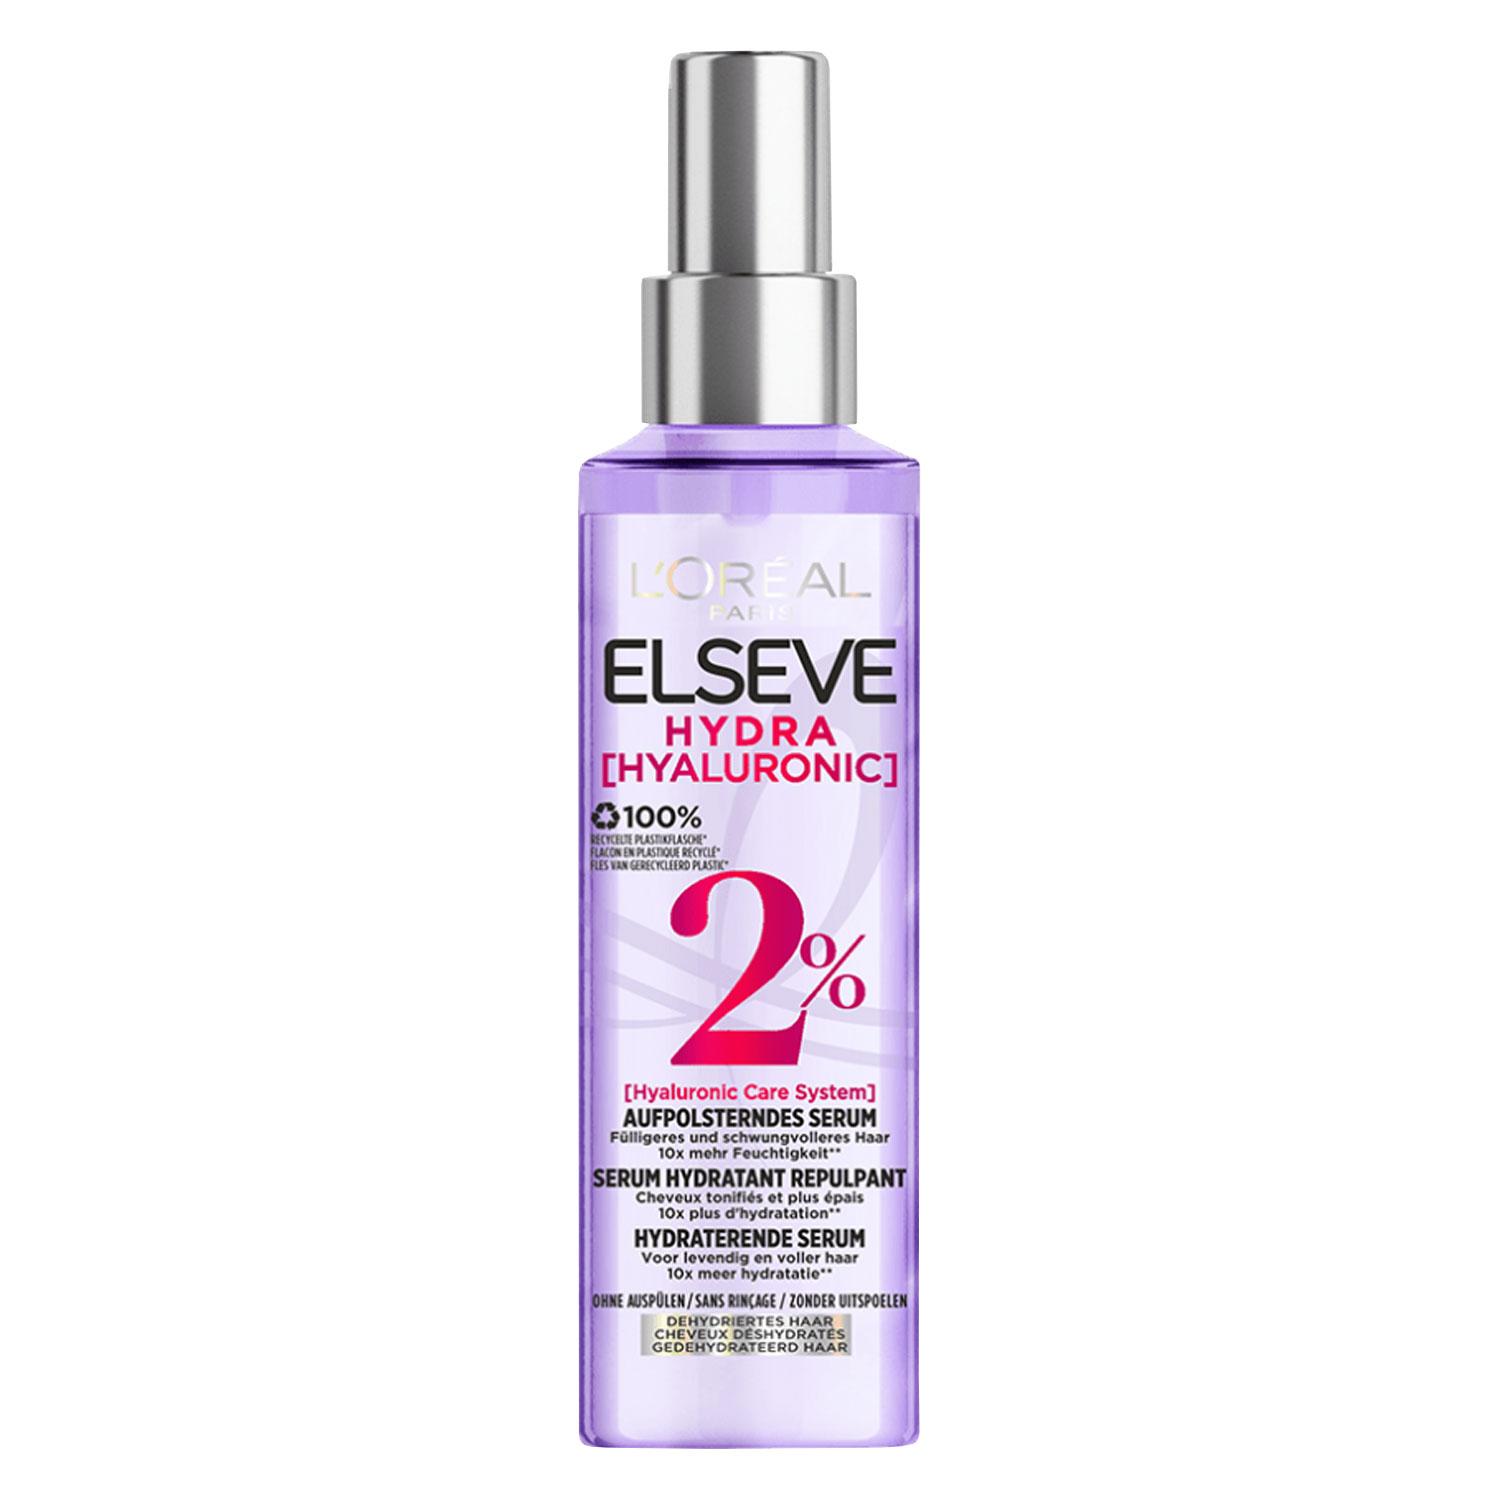 LOréal Elseve Haircare - Hydra Hyaluronic Replenishing Serum 2% Hyaluronic Care System